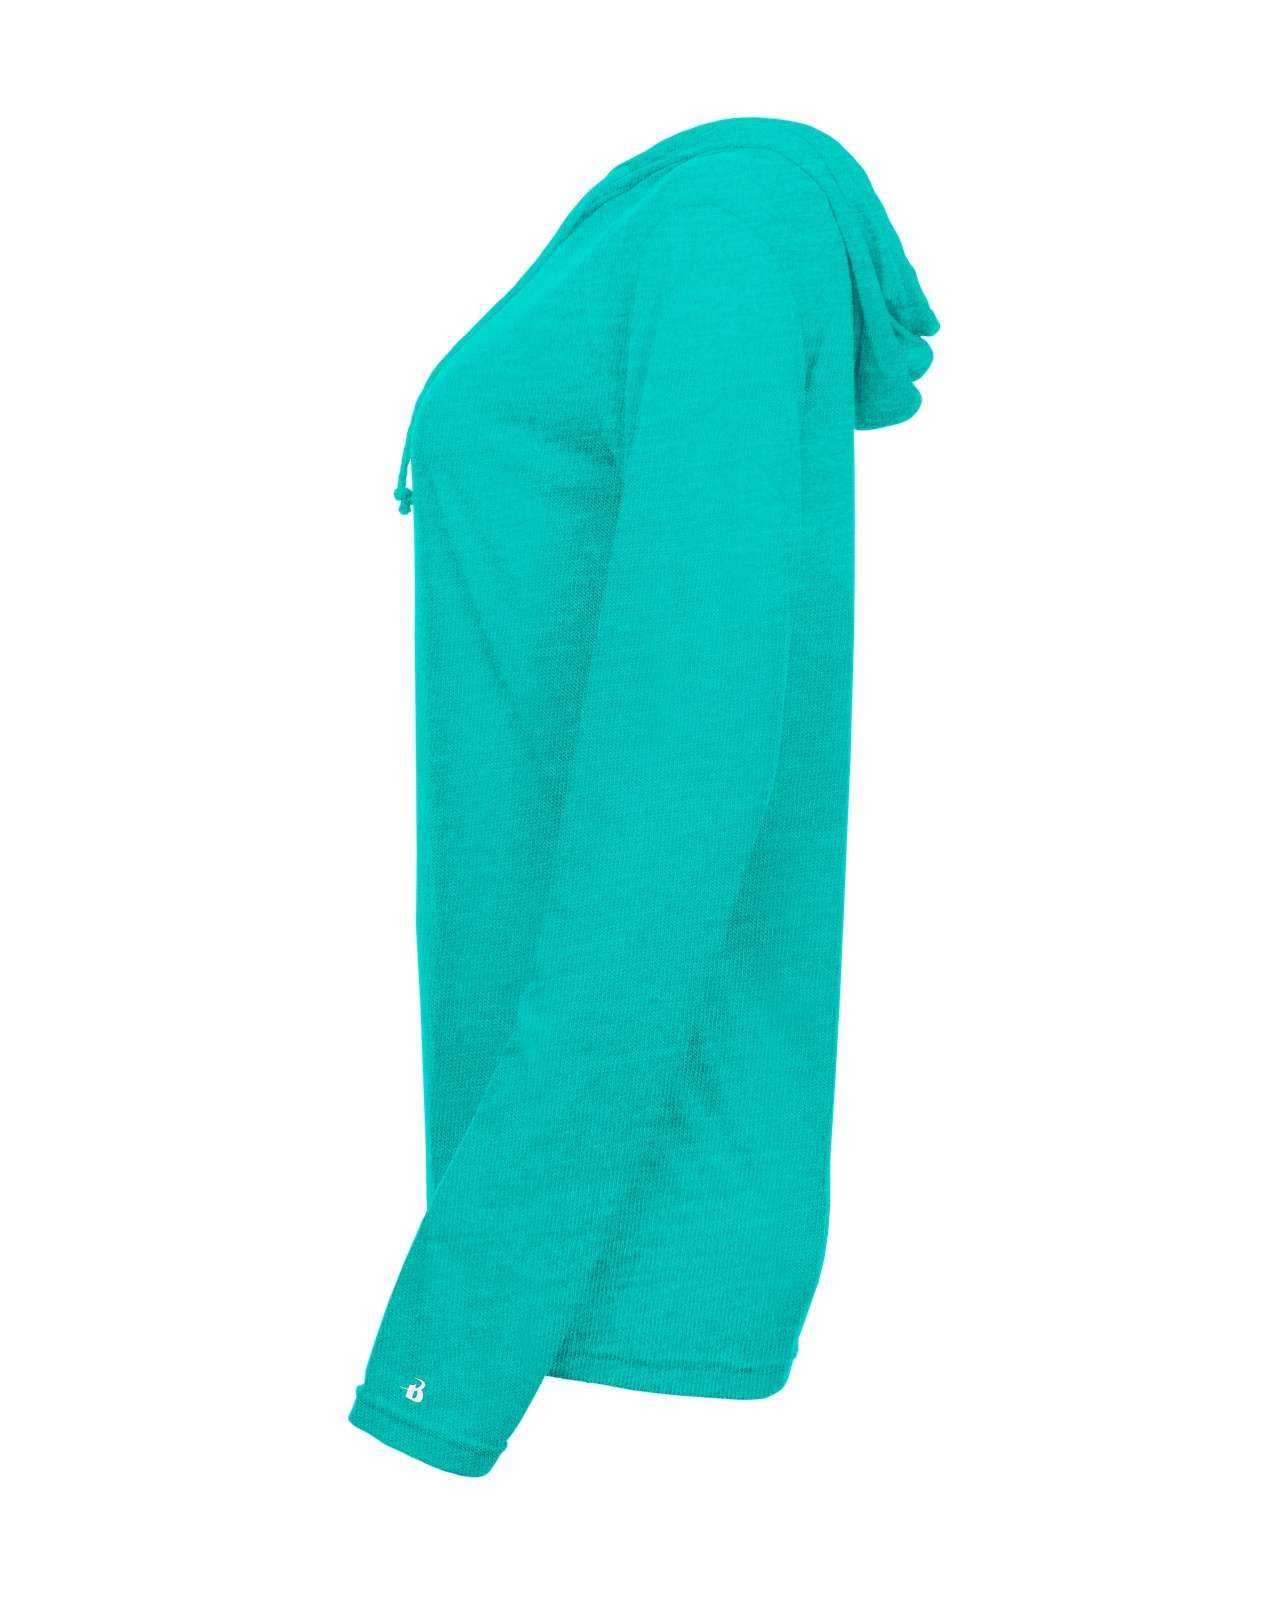 Badger Sport 496500 Tri-Blend Surplice Women's Hoodie Tee - Turquoise - HIT a Double - 1